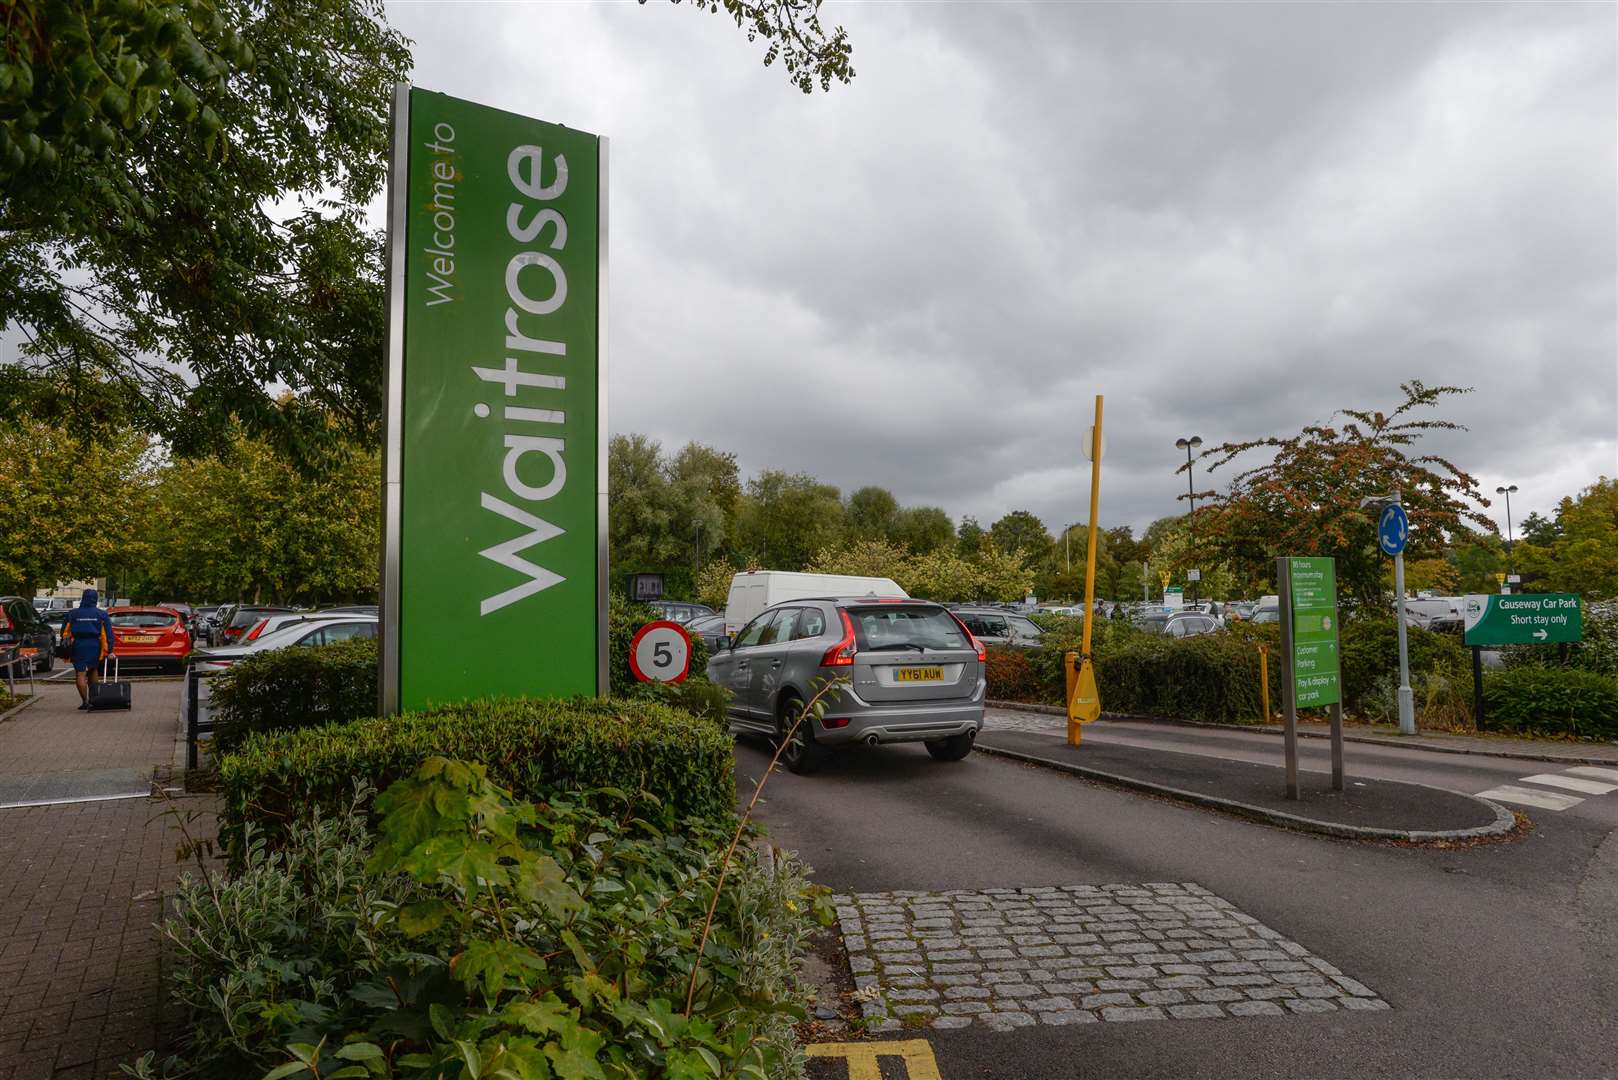 Waitrose food stores will be unaffected, though Bluewater's is to close